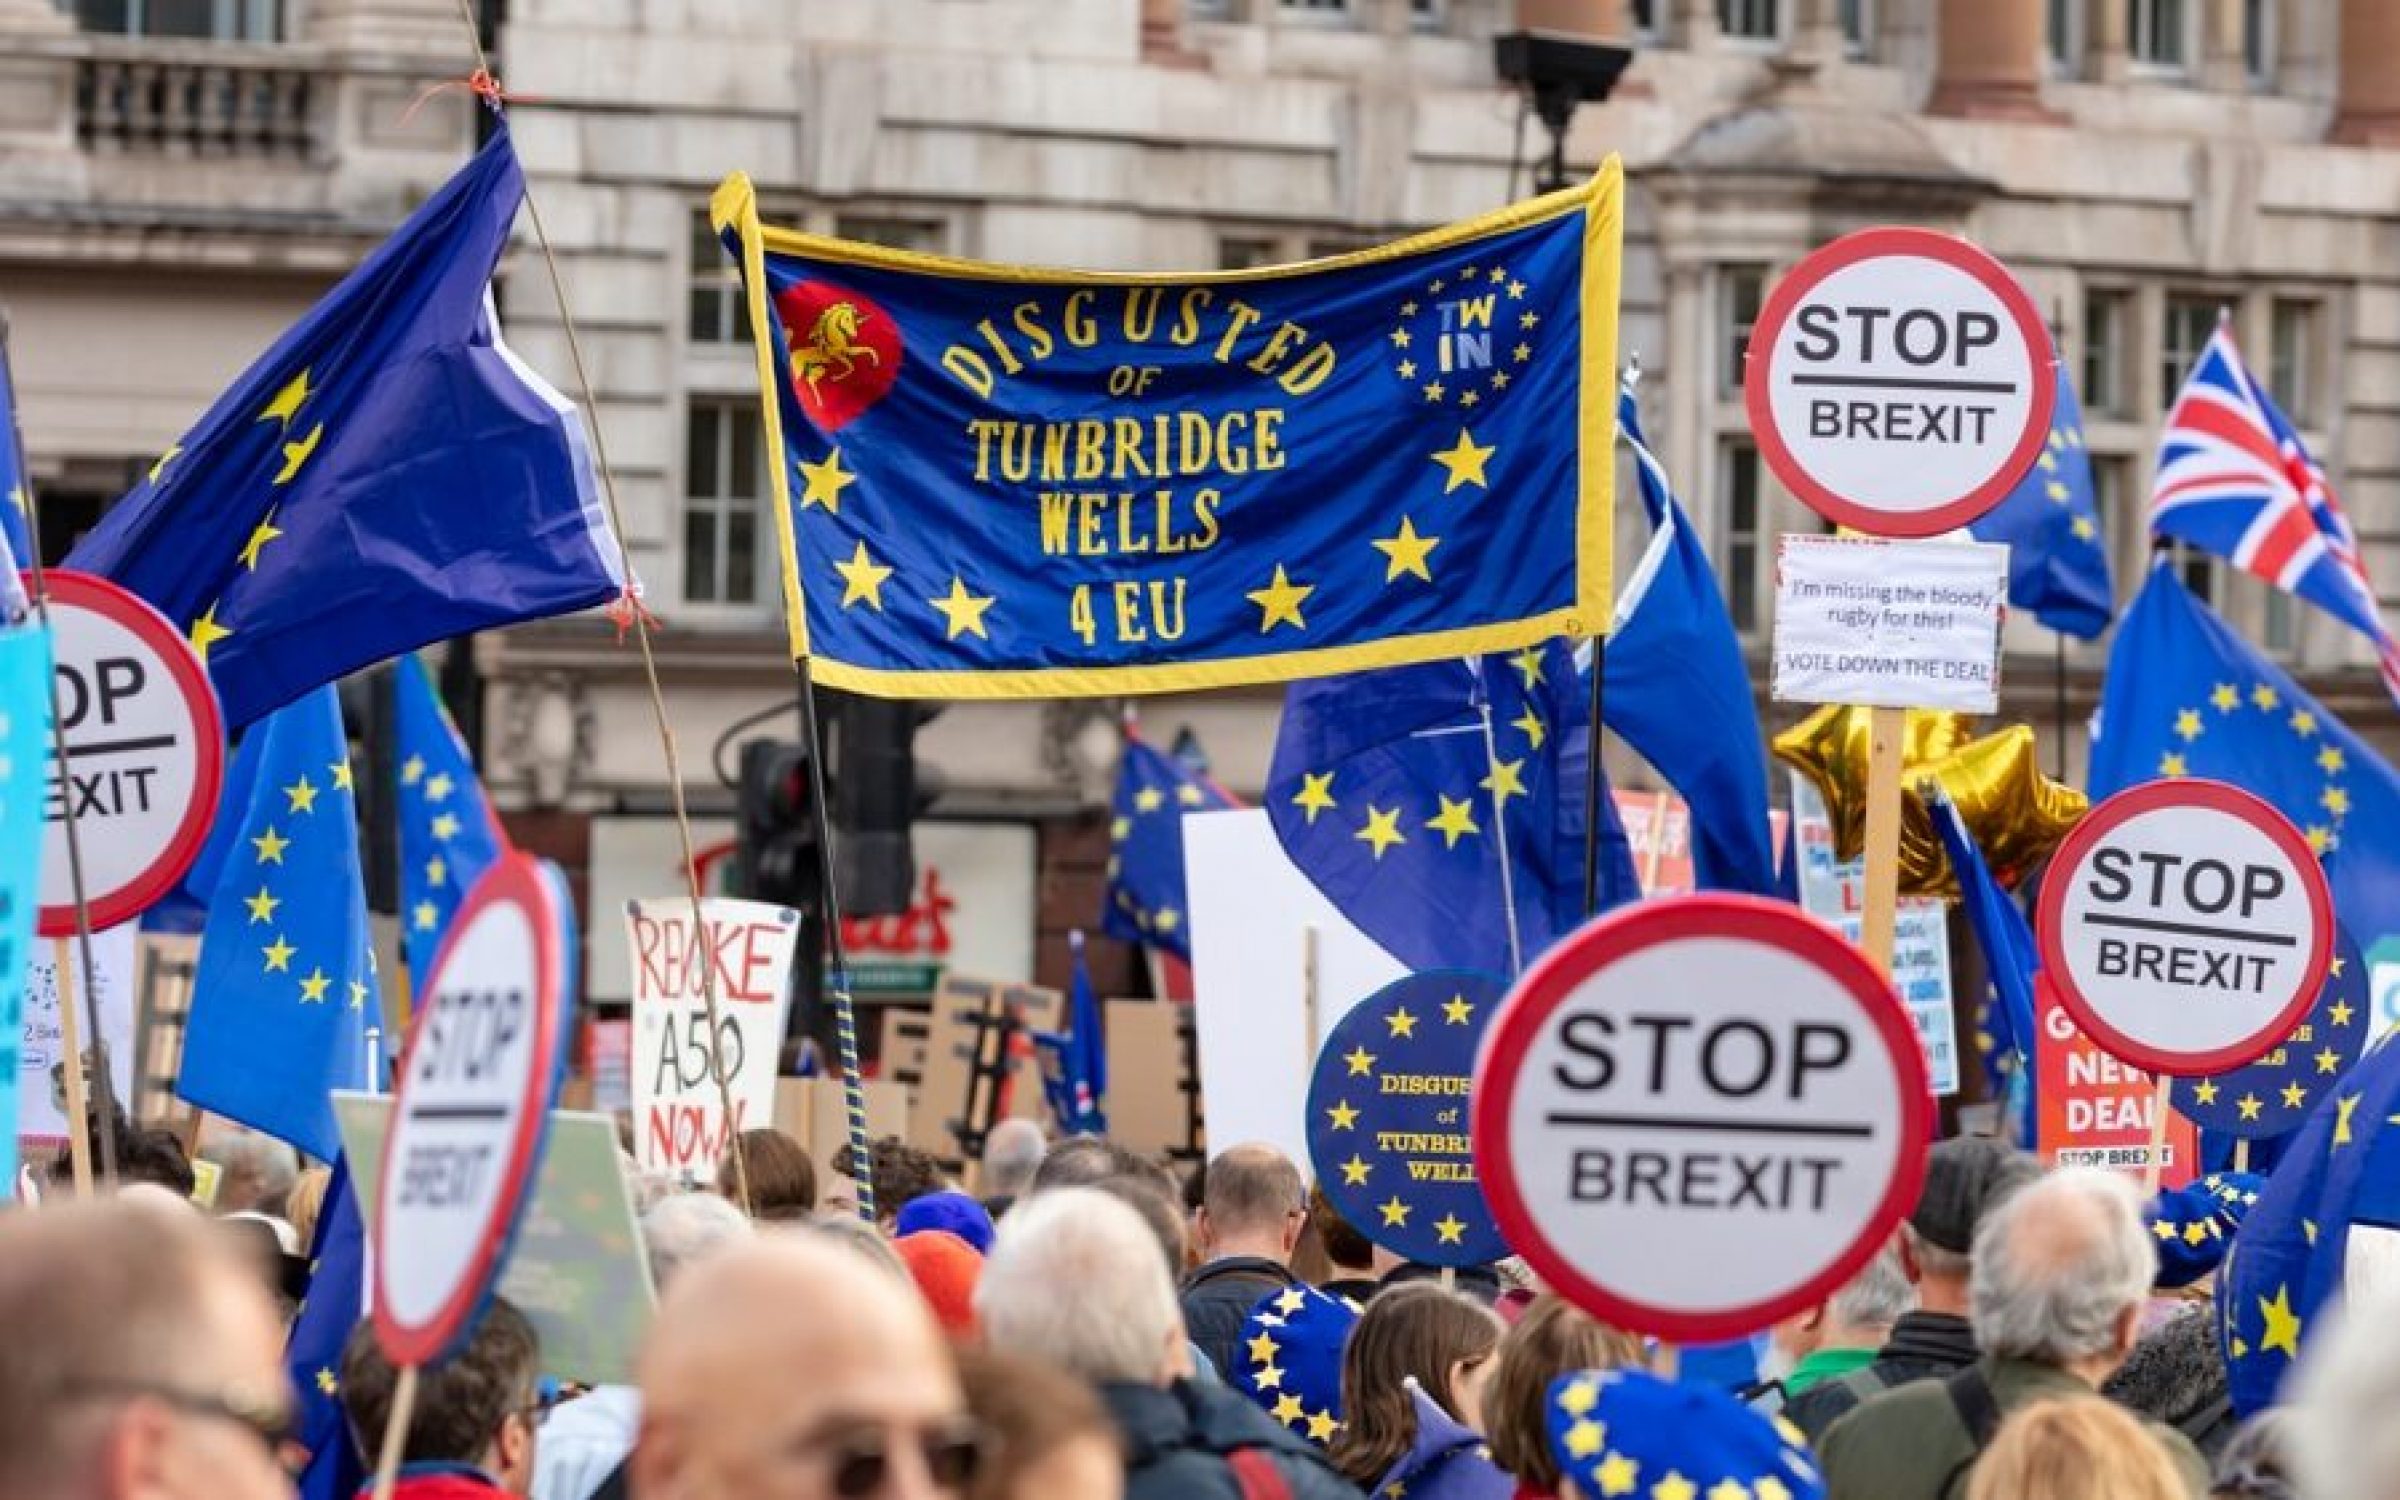 Whitehall, London, UK; 19th October 2019; Crowd of anti-Brexit protesters.